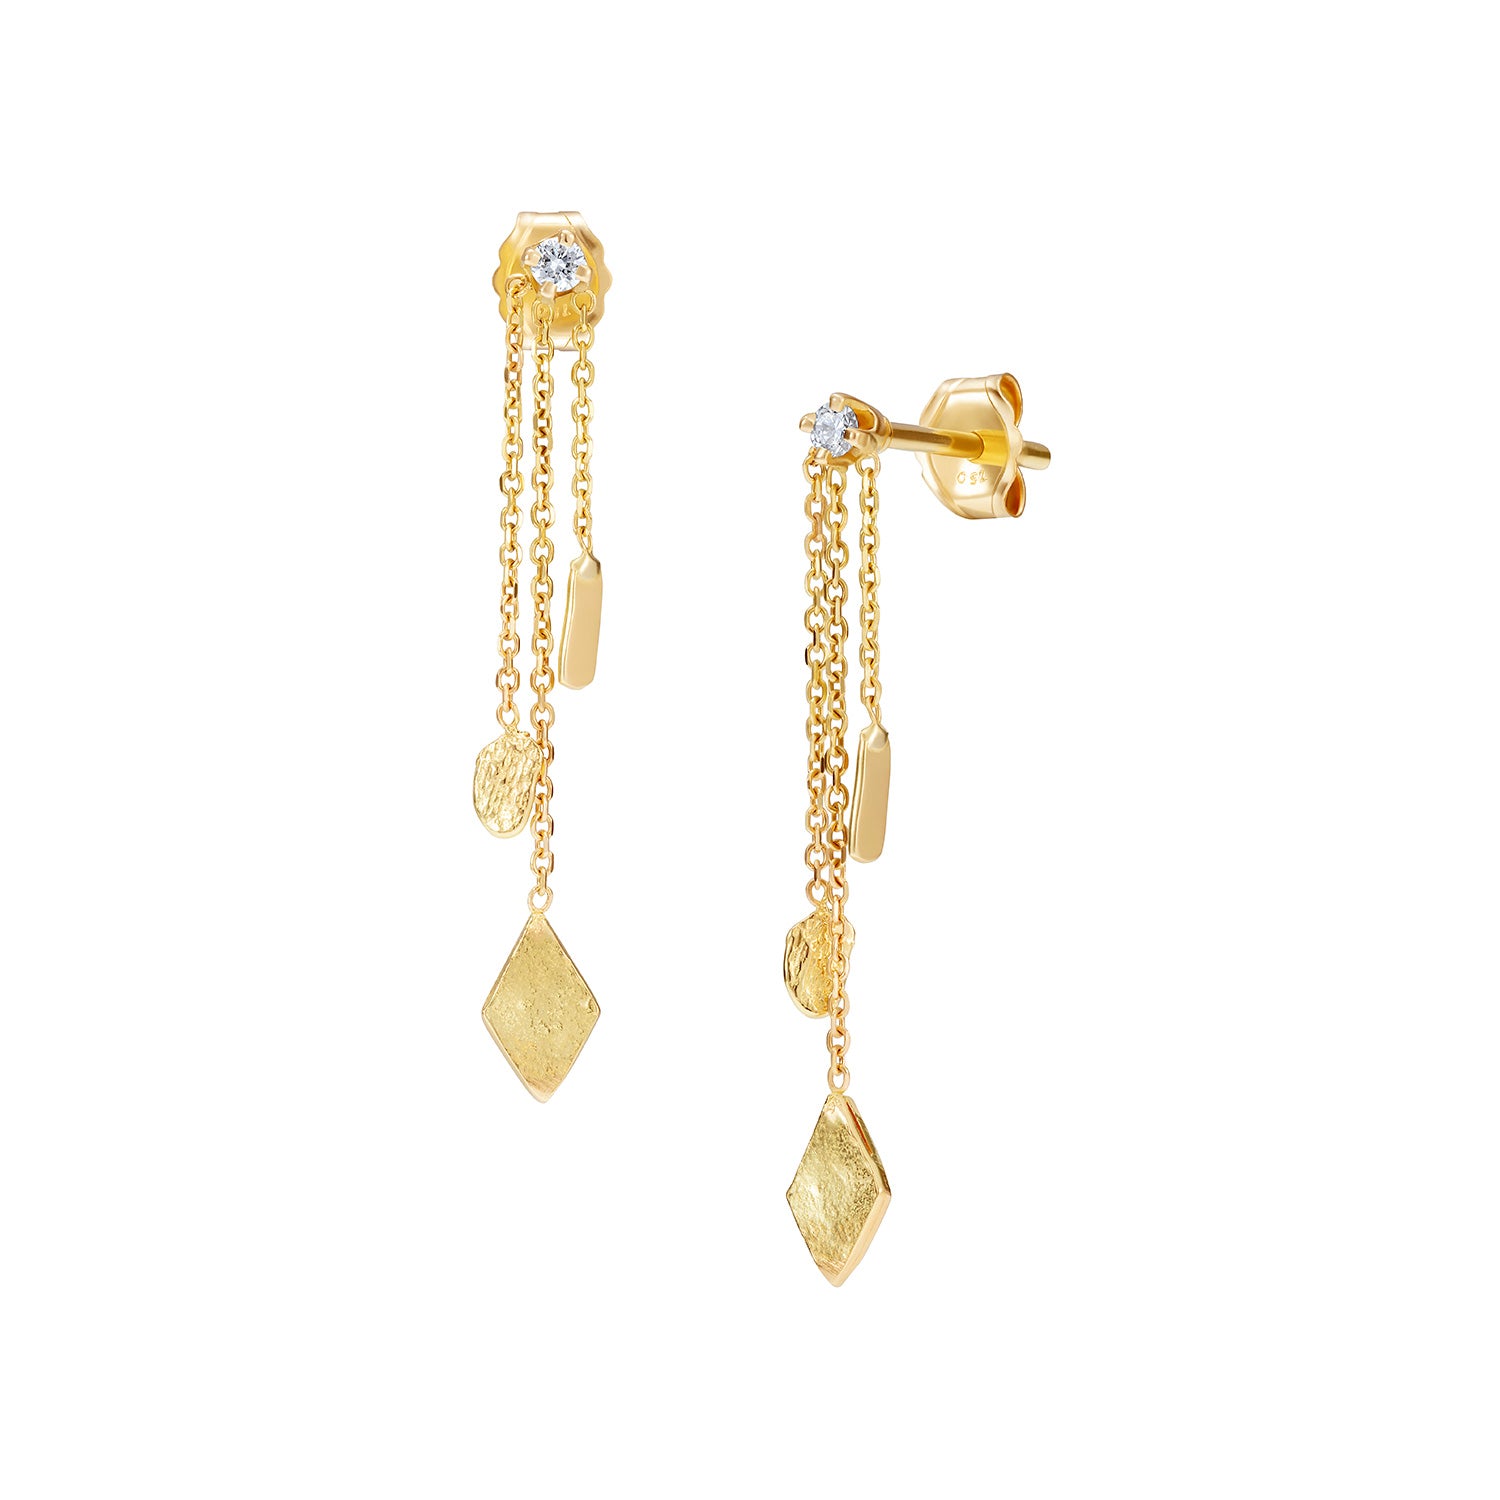 18ct Gold Diamond stud with three hanging chains and mixed Gold shapes on ends.